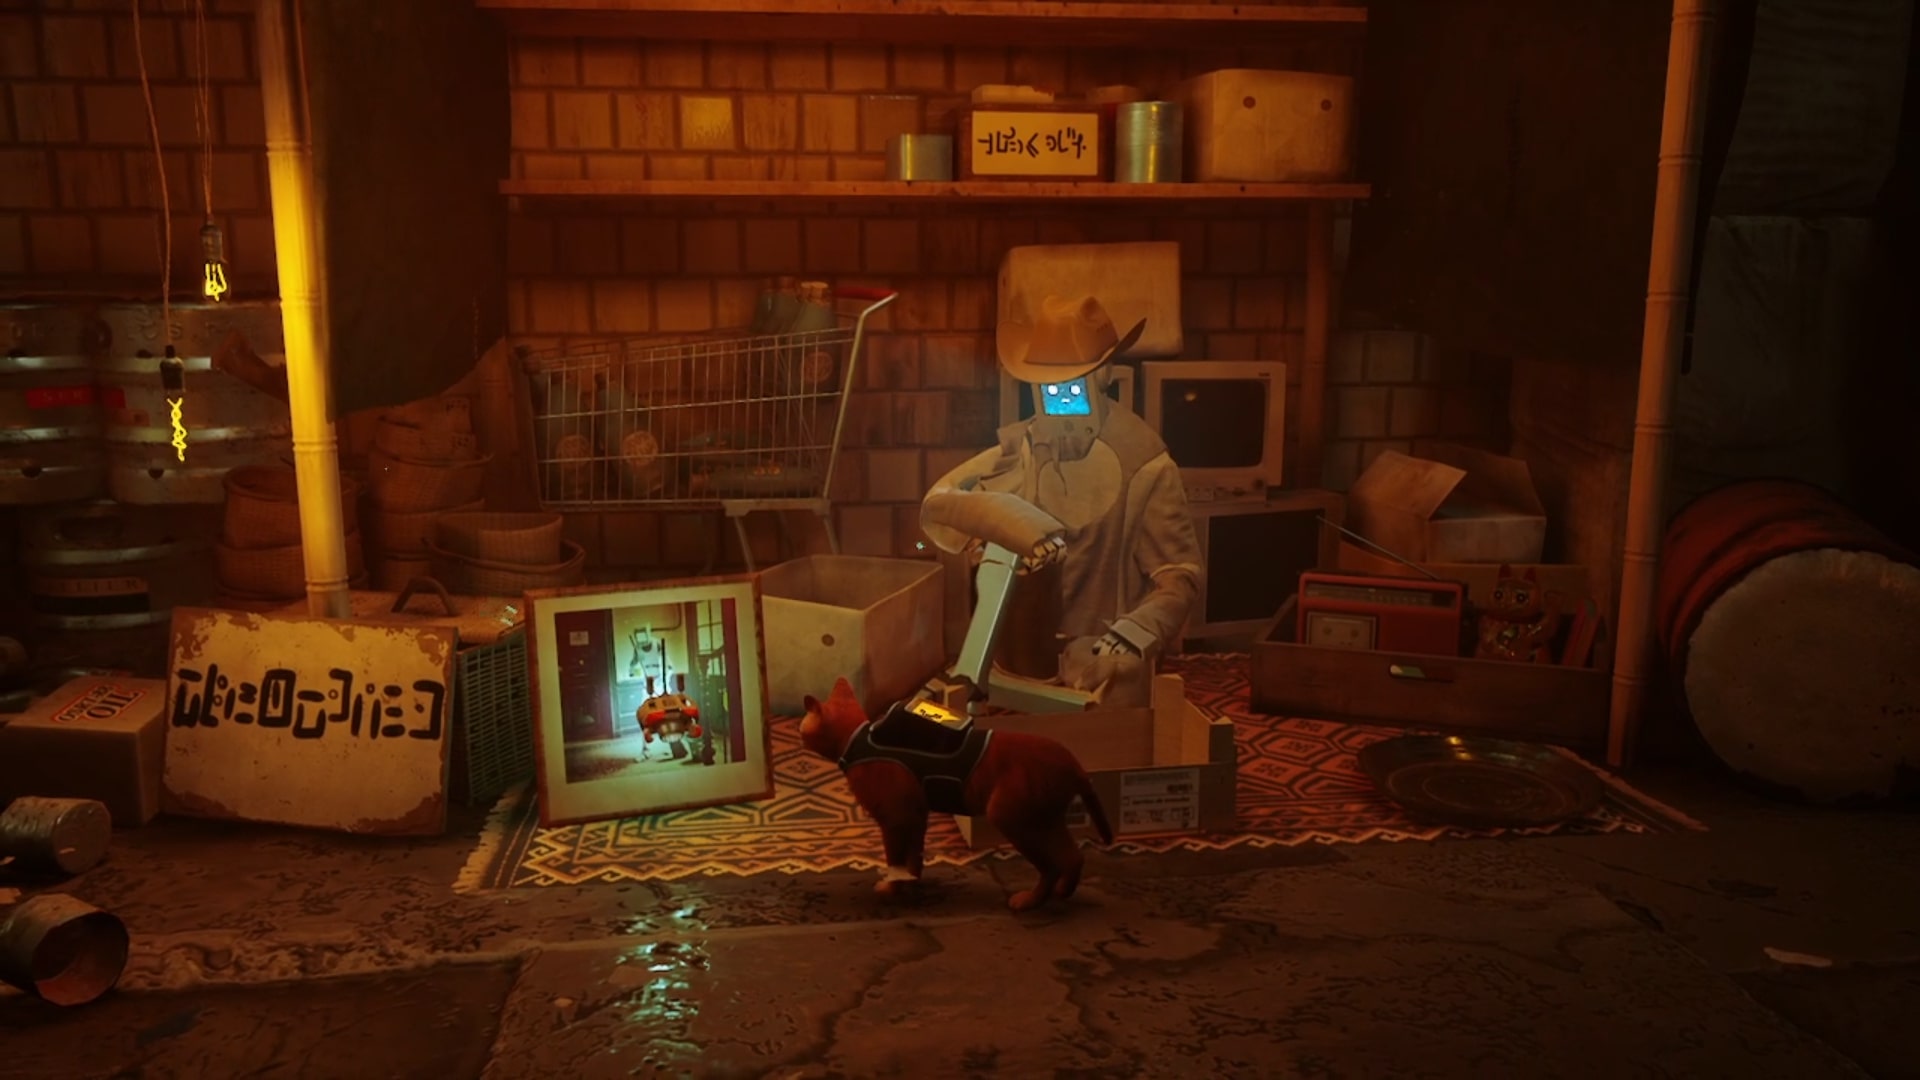 Stray memories guide: The eponymous stray and B-12 looking at the ancient relic in the Barterman's shop, which turns out to be a photograph of the robot sweeping the floor, while the Barterman looks on